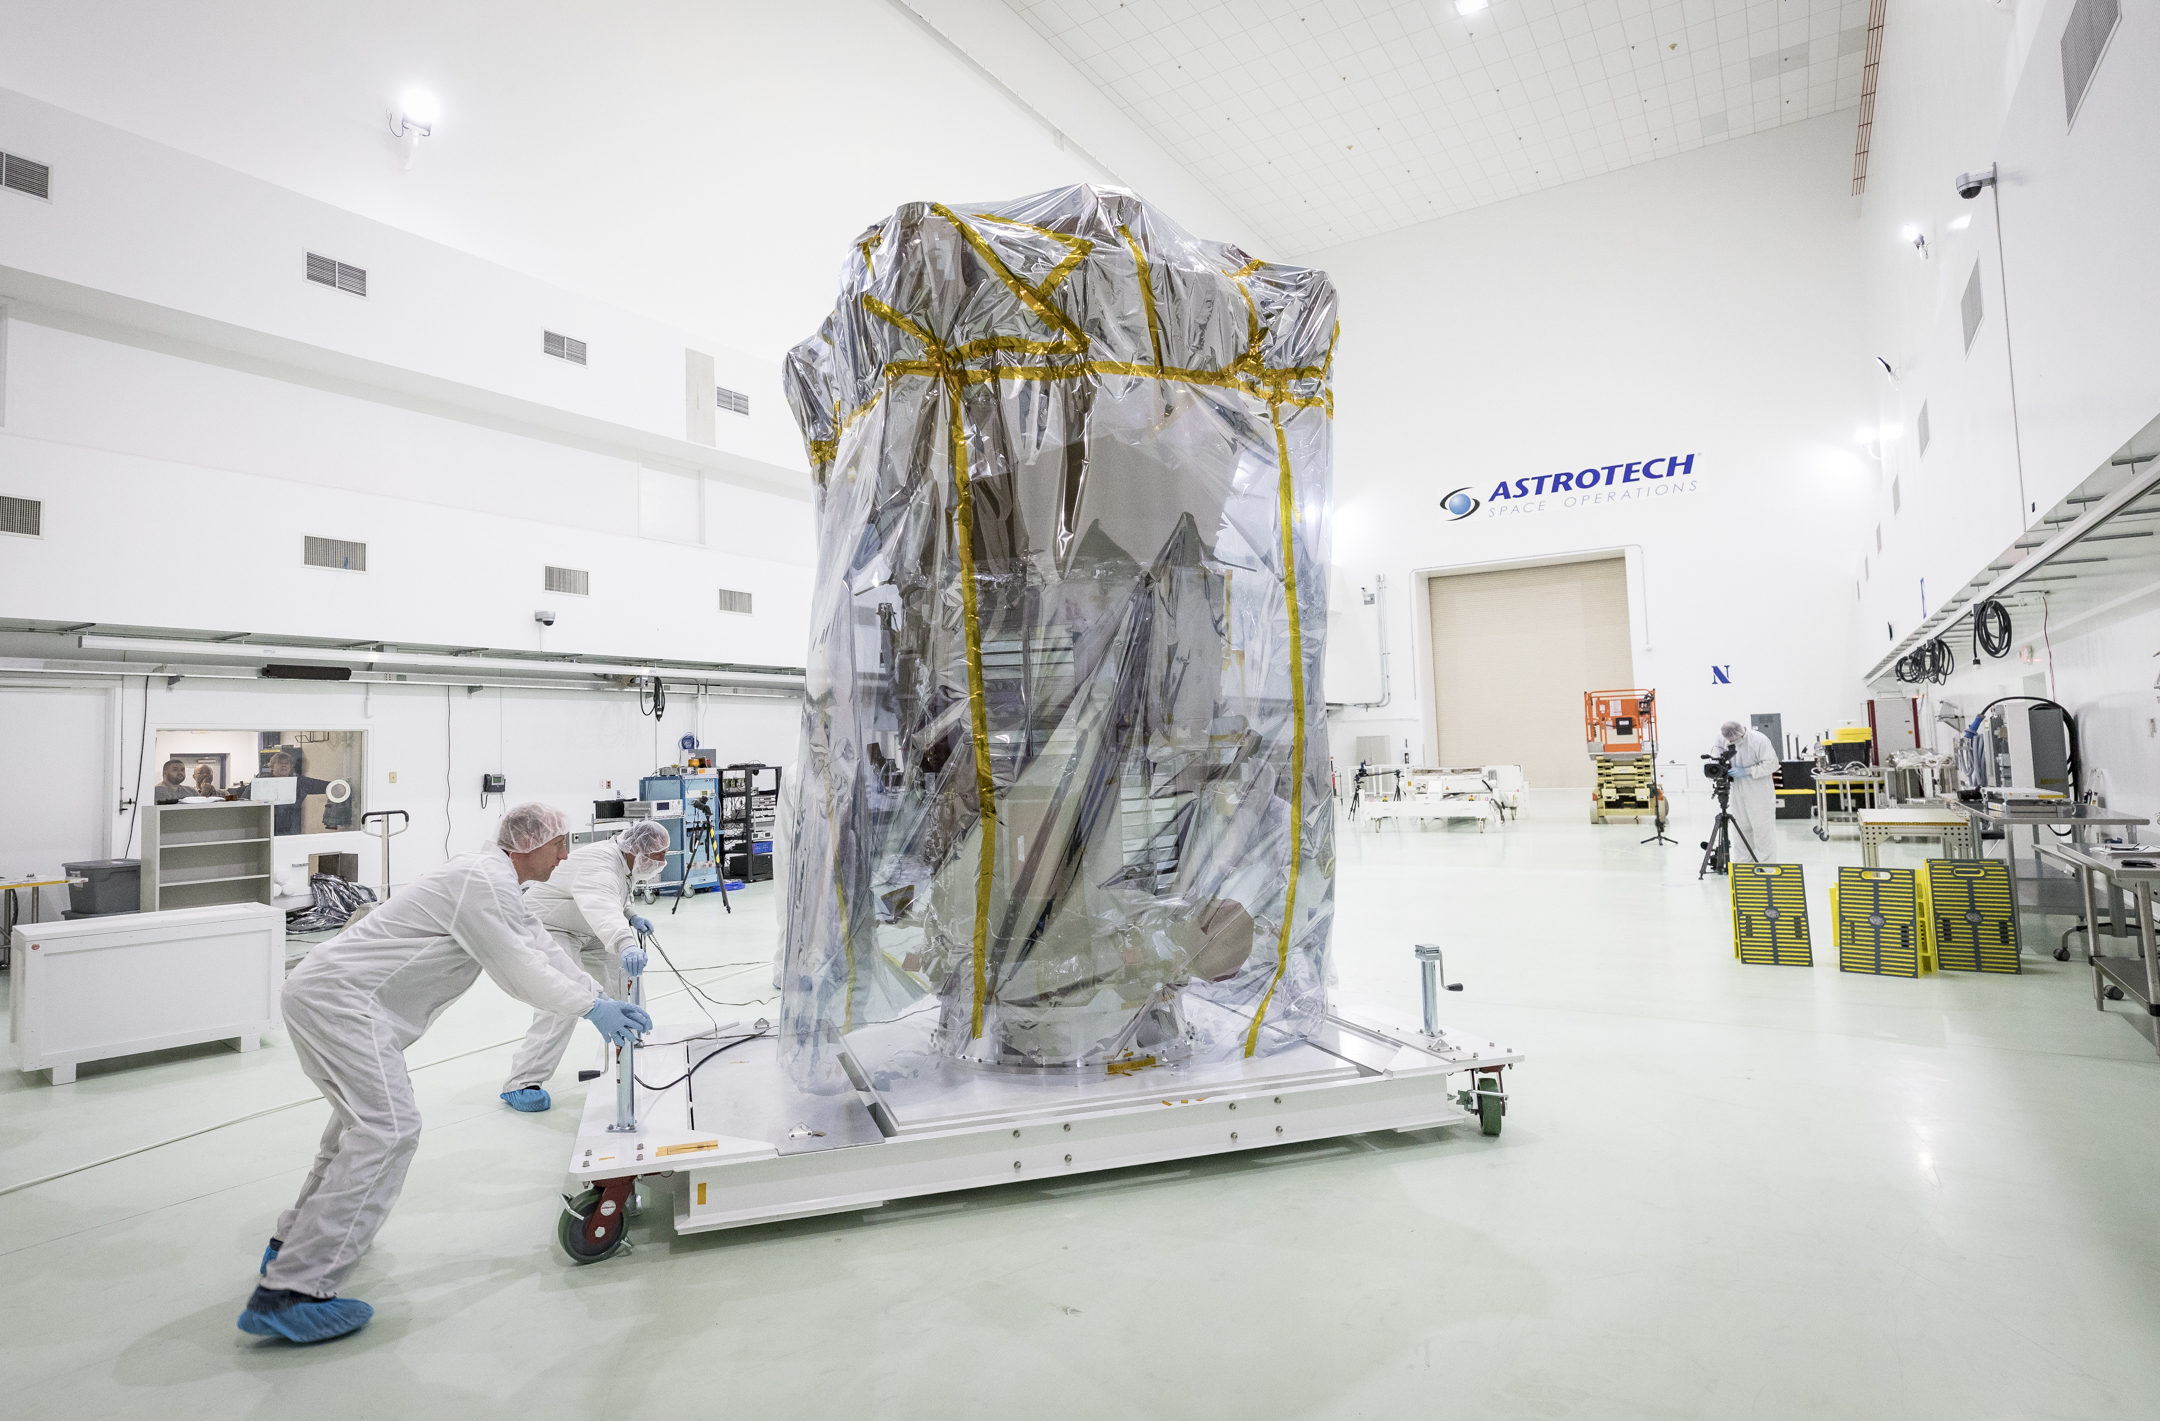 NASA’s Parker Solar Probe is wheeled into position in a clean room at Astrotech Space Operations in Titusville, Florida, for pre-launch testing and preparations. On April 3, 2018, the spacecraft was transported from NASA’s Goddard Space Flight Center in Greenbelt, Maryland, to Joint Base Andrews by truck, then by a United States Air Force C-17 to Titusville. 